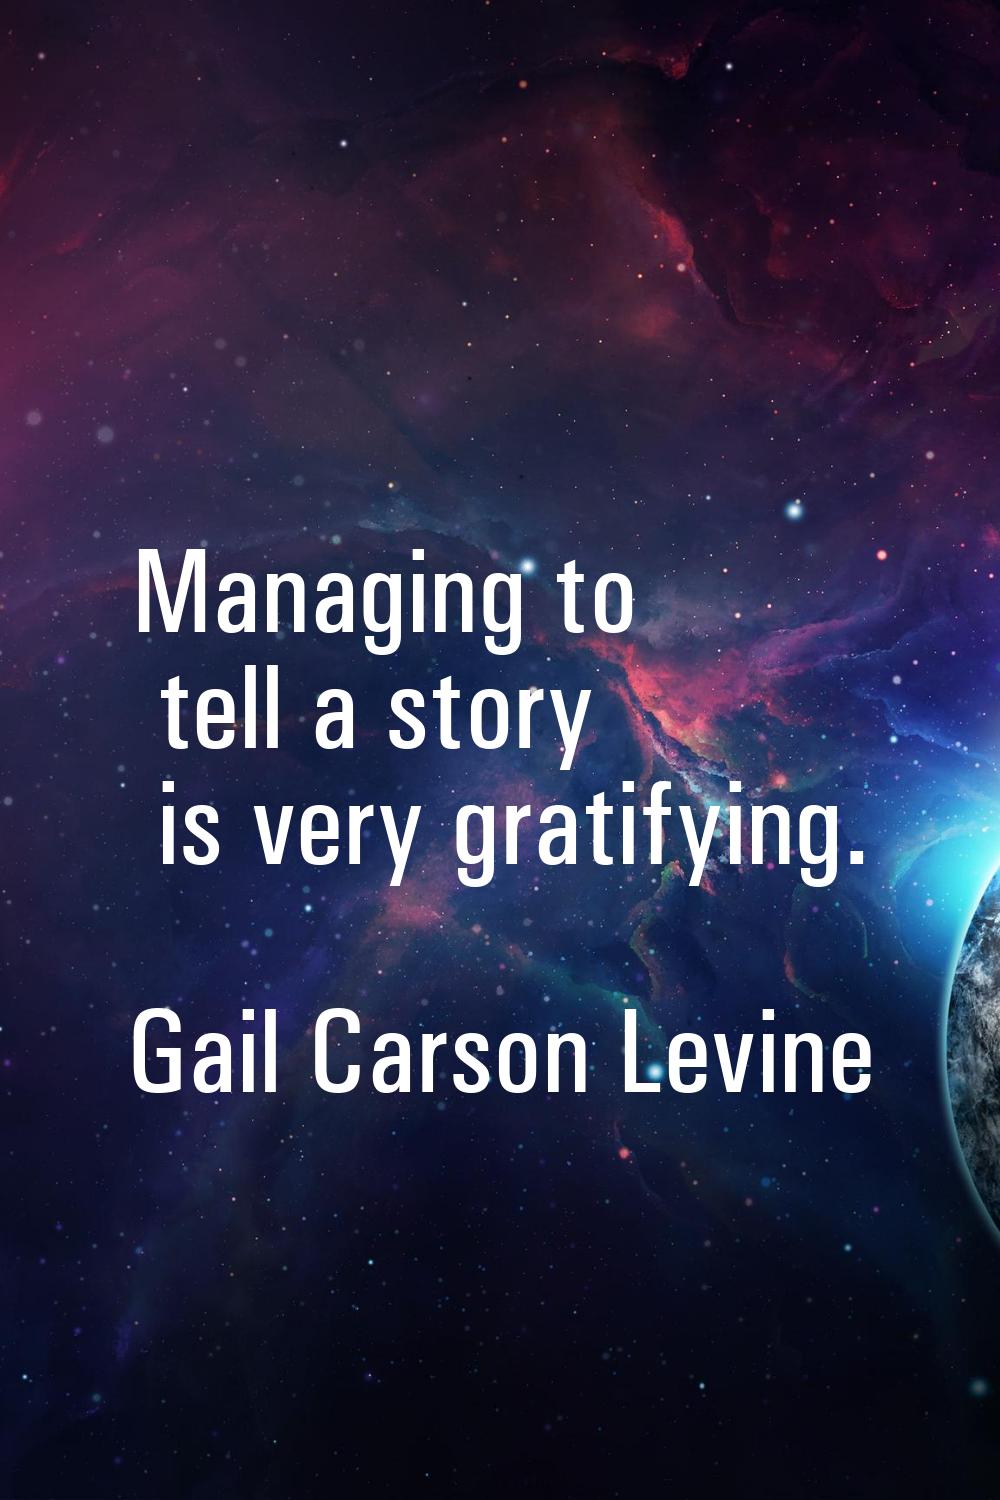 Managing to tell a story is very gratifying.